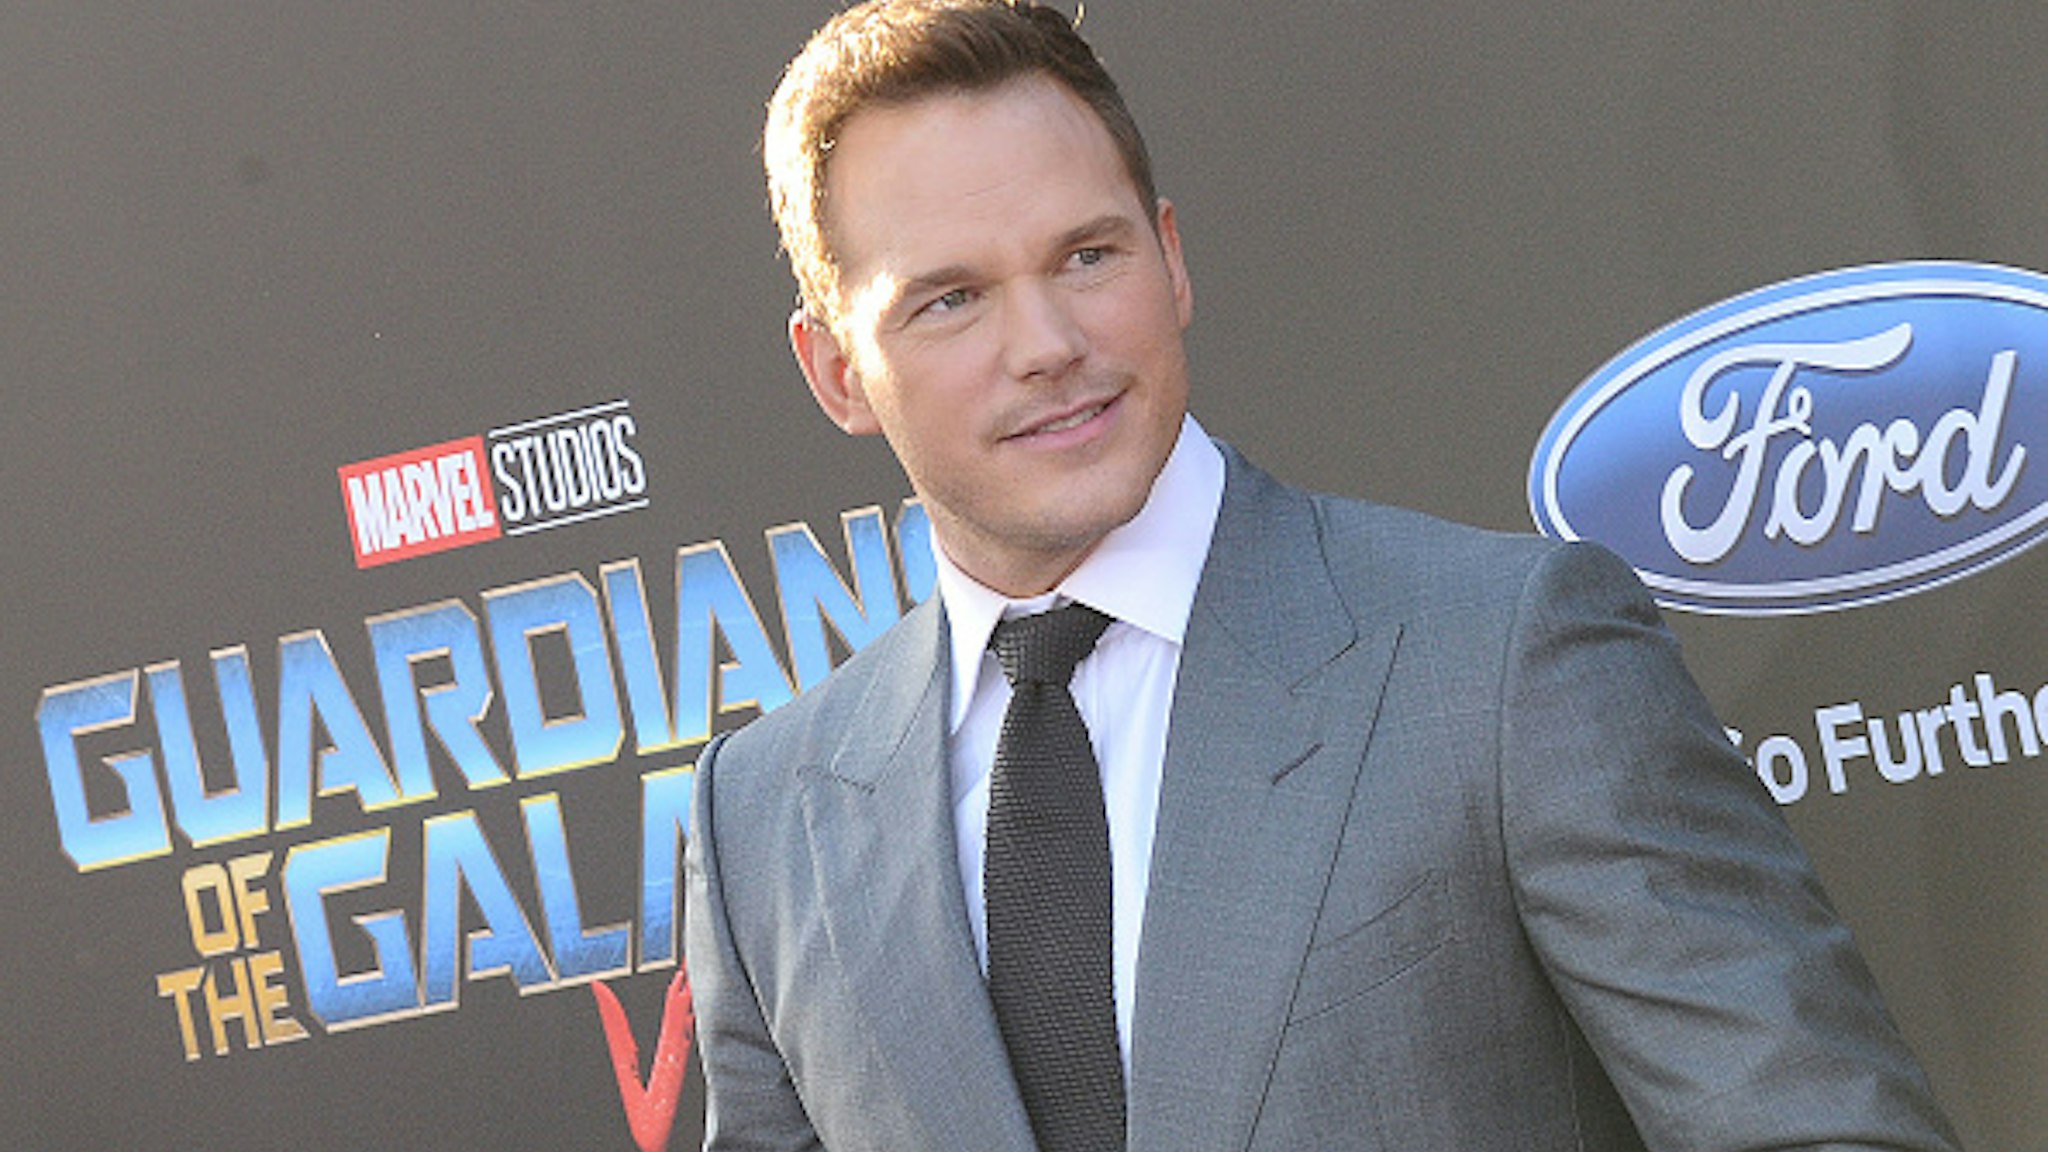 HOLLYWOOD, CA - APRIL 19: Actor Chris Pratt attends the premiere of "Guardians of the Galaxy Vol. 2" at Dolby Theatre on April 19, 2017 in Hollywood, California.